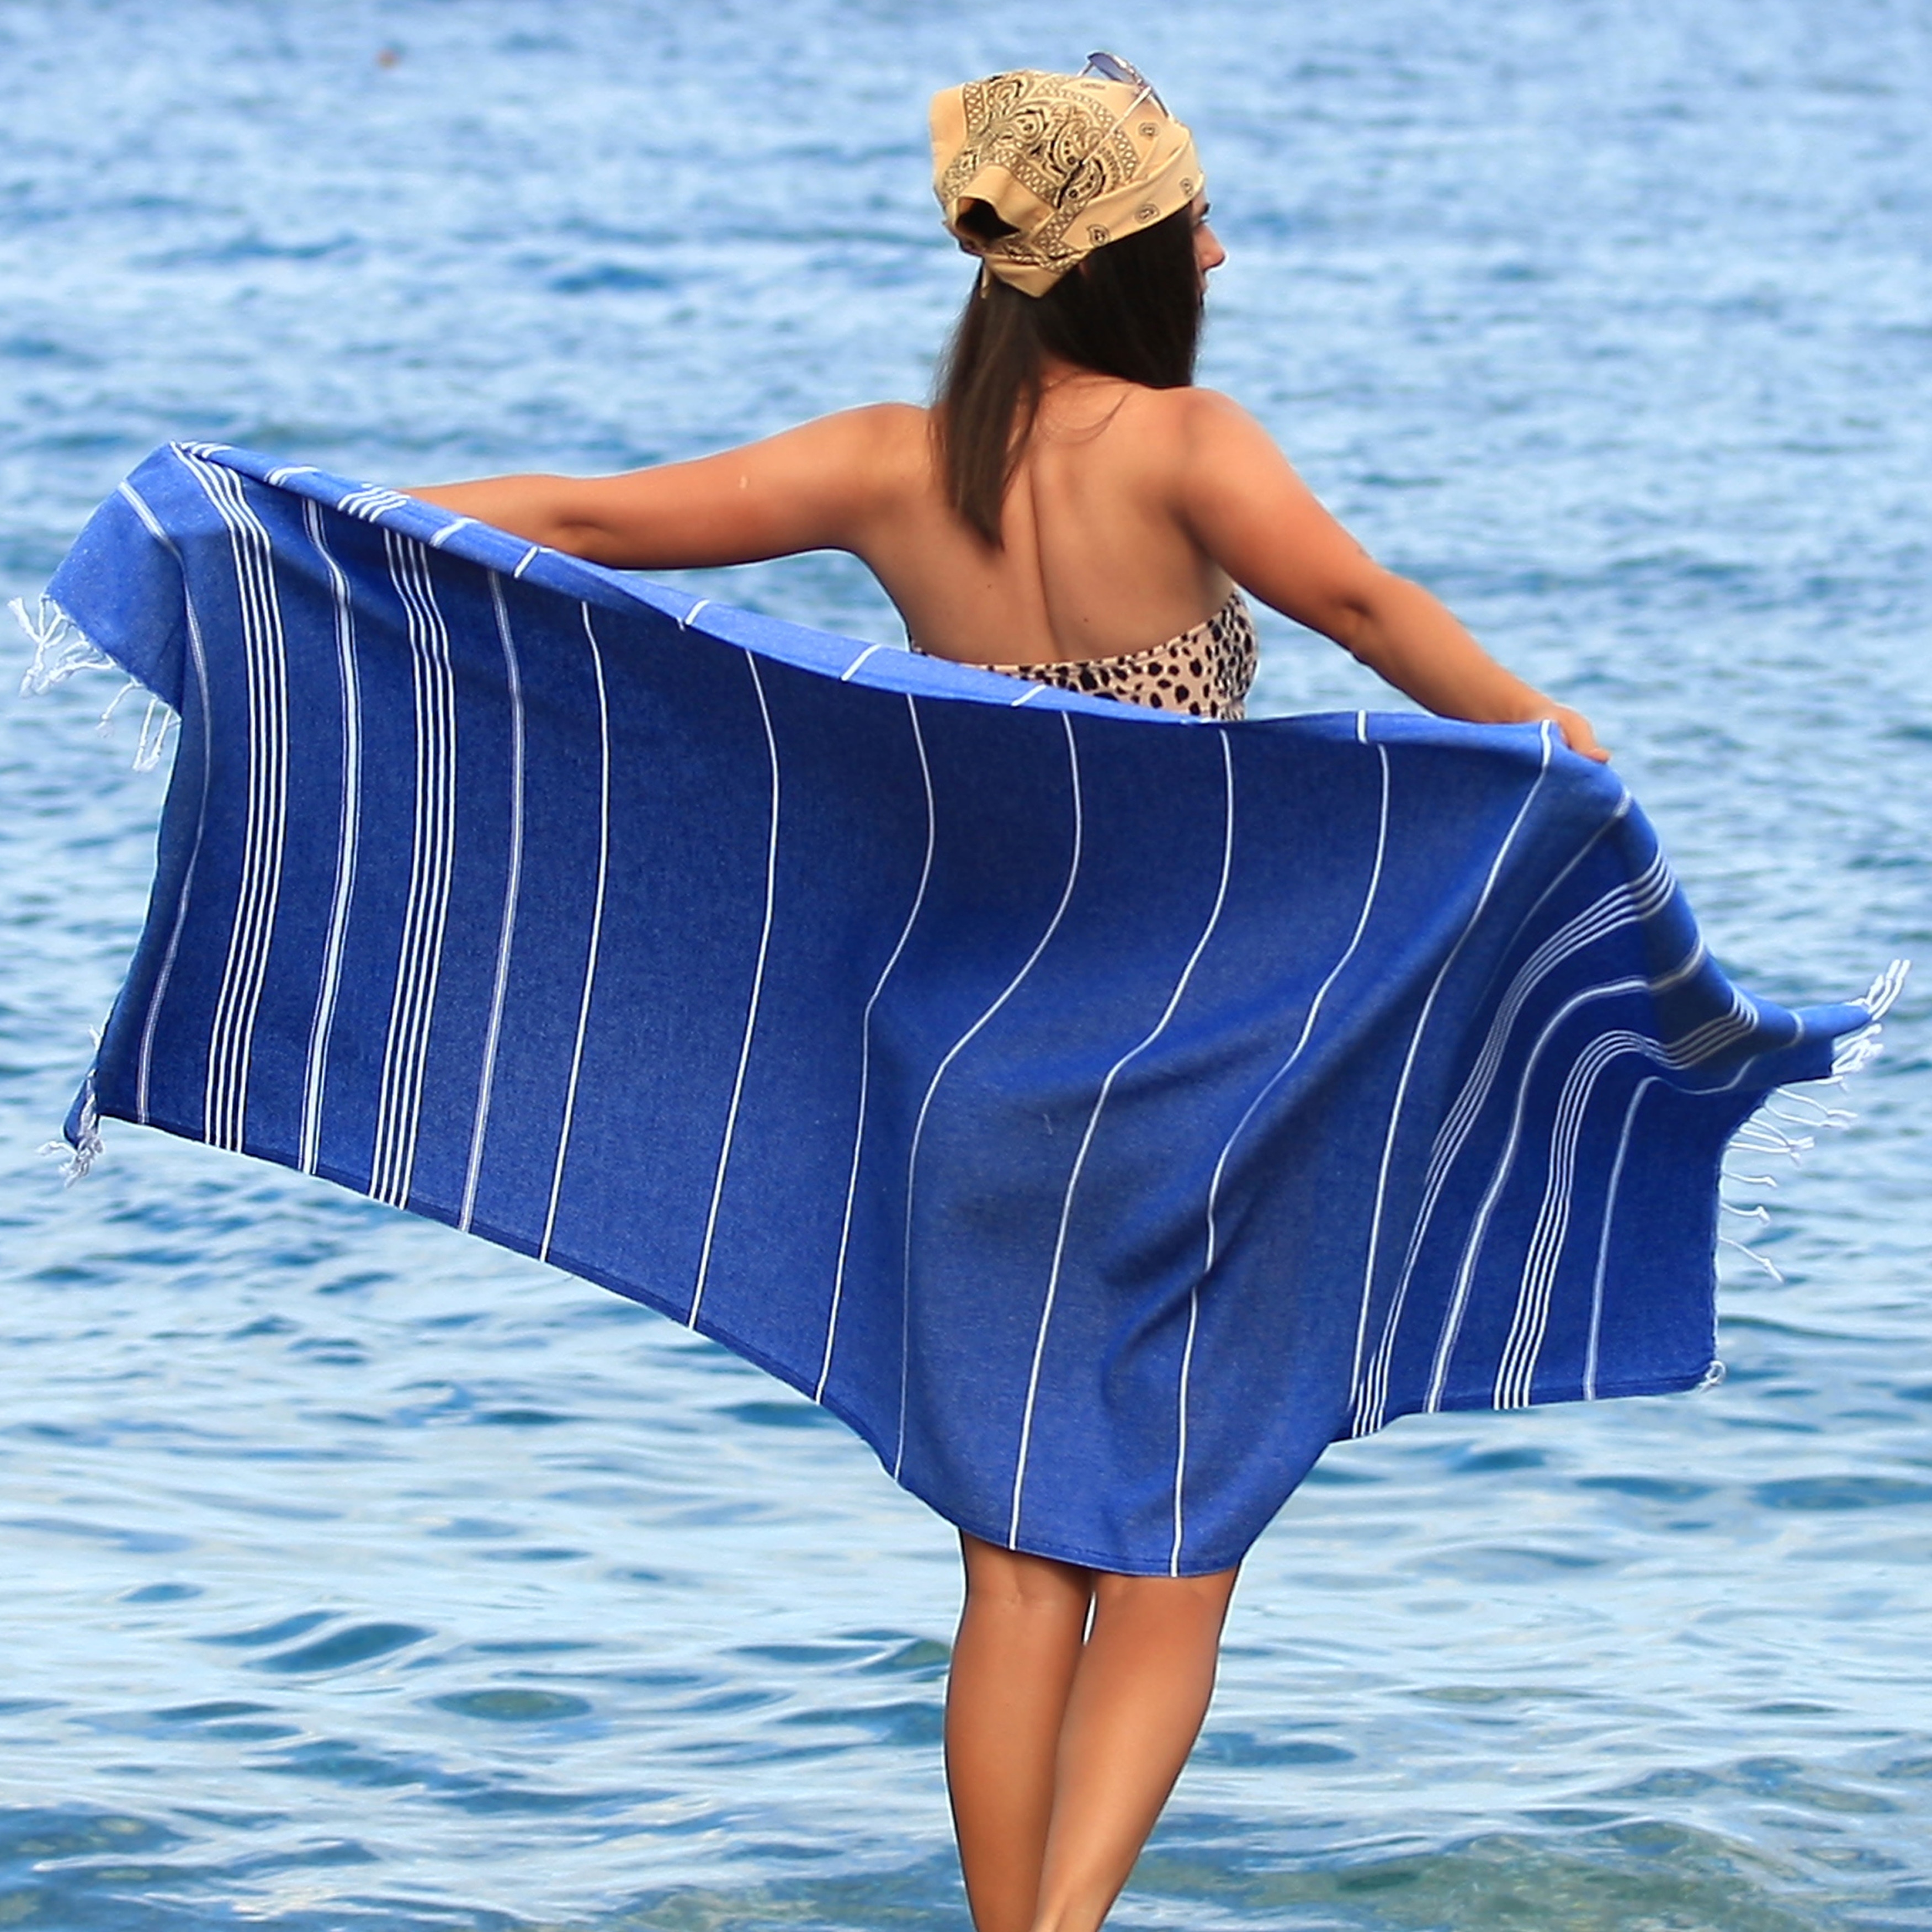 https://ak1.ostkcdn.com/images/products/is/images/direct/64be3c2a32d3a5815c628a5b5c1a6b2ff7b8f259/Lina-Turkish-Beach-Towel-%2838-x-71%29-100%25-Cotton-Absorbent-Prewashed-for-Soft-Feel-Quick-Dry-Sand-free-Multi-use-Beach-Towel.jpg